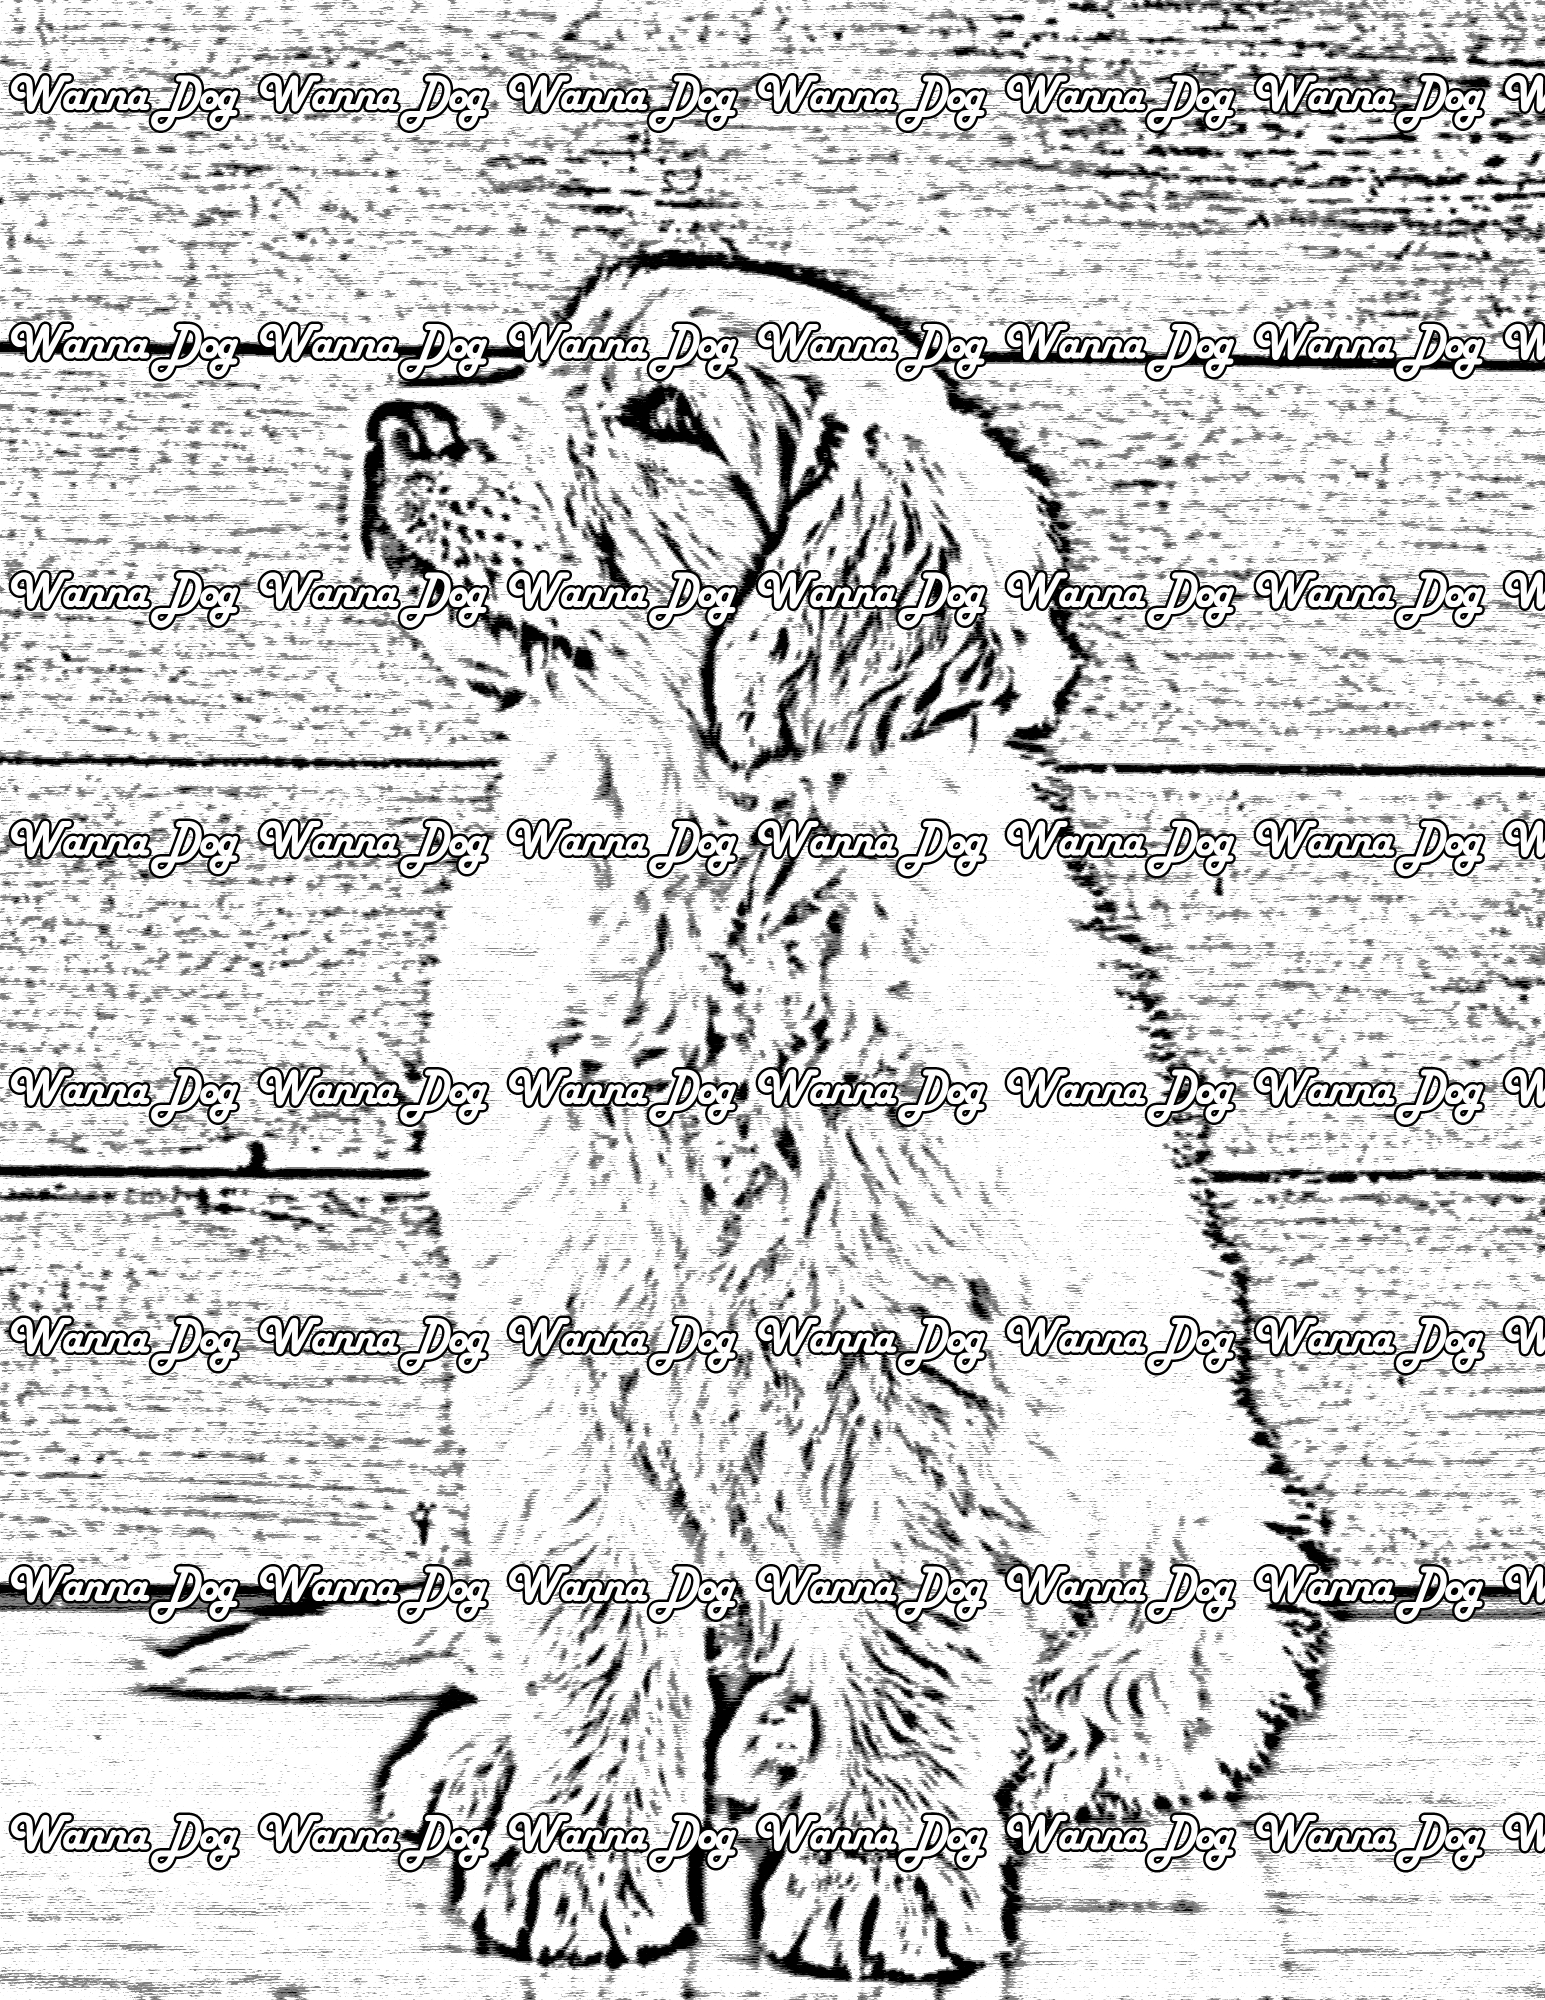 Golden Retriever Puppy Coloring Page of a Golden Retriever Puppy looking away from the camera